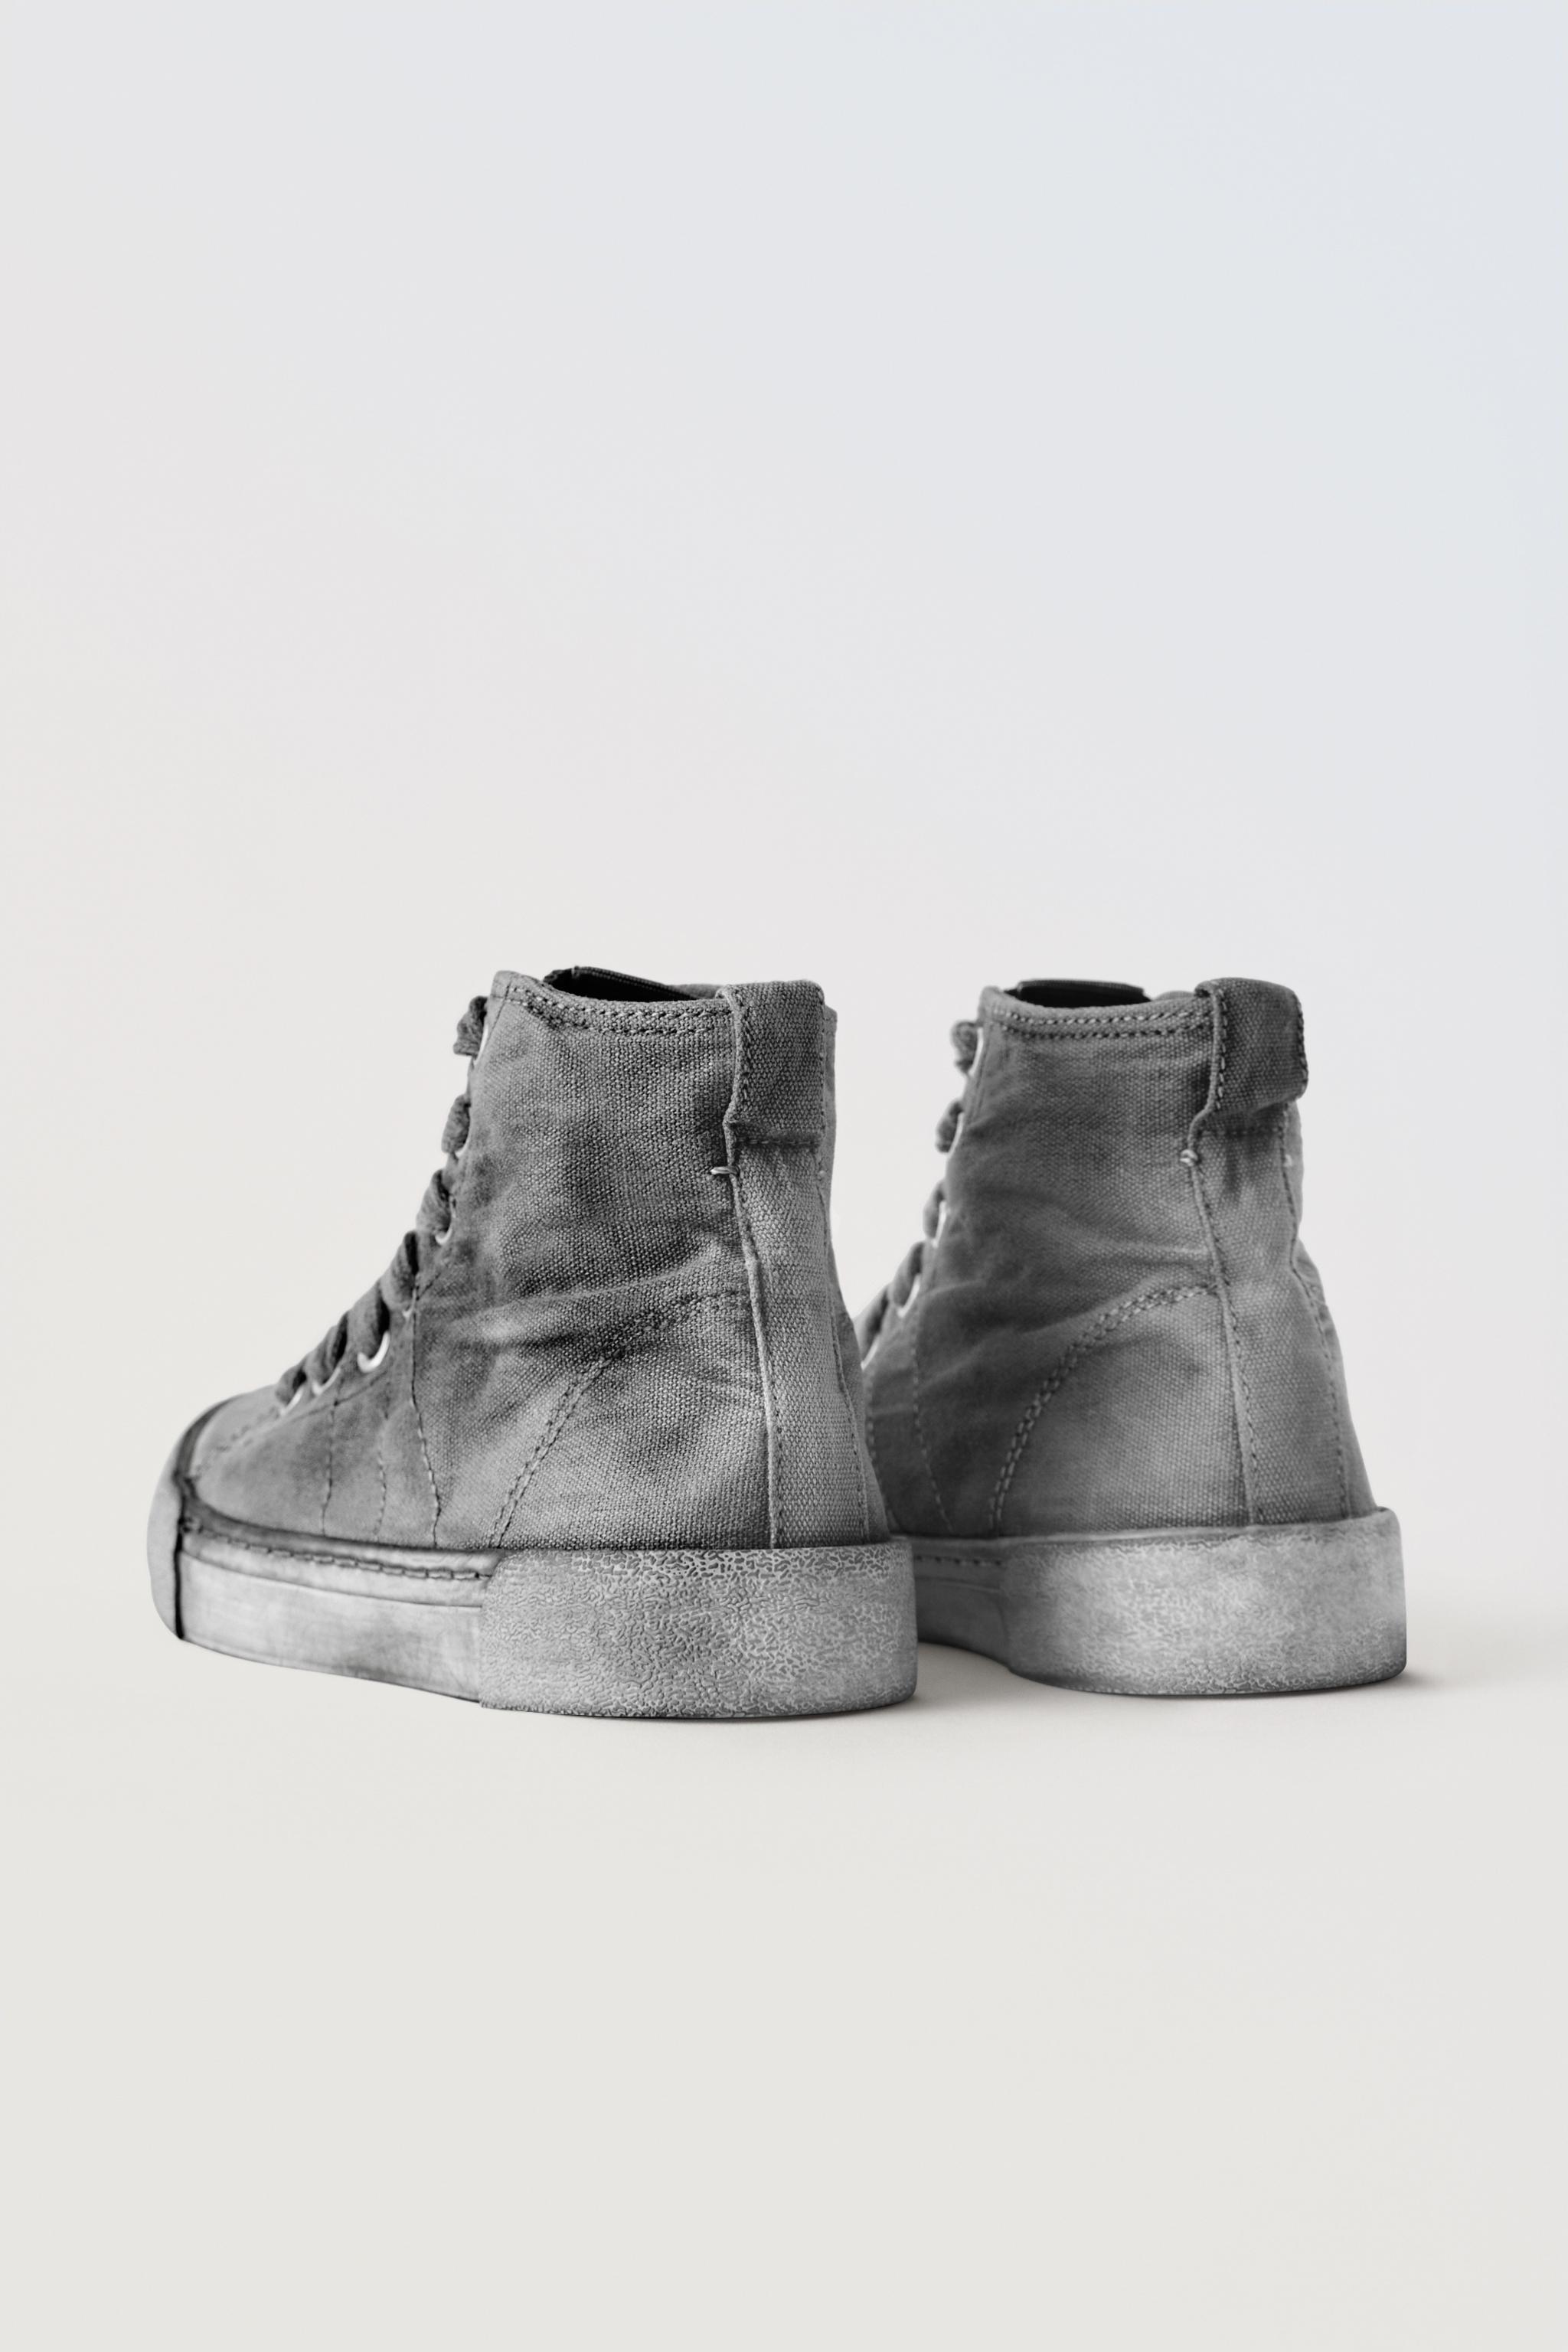 DISTRESSED EFFECT DENIM HIGH-TOP SNEAKERS - Gray | ZARA United States